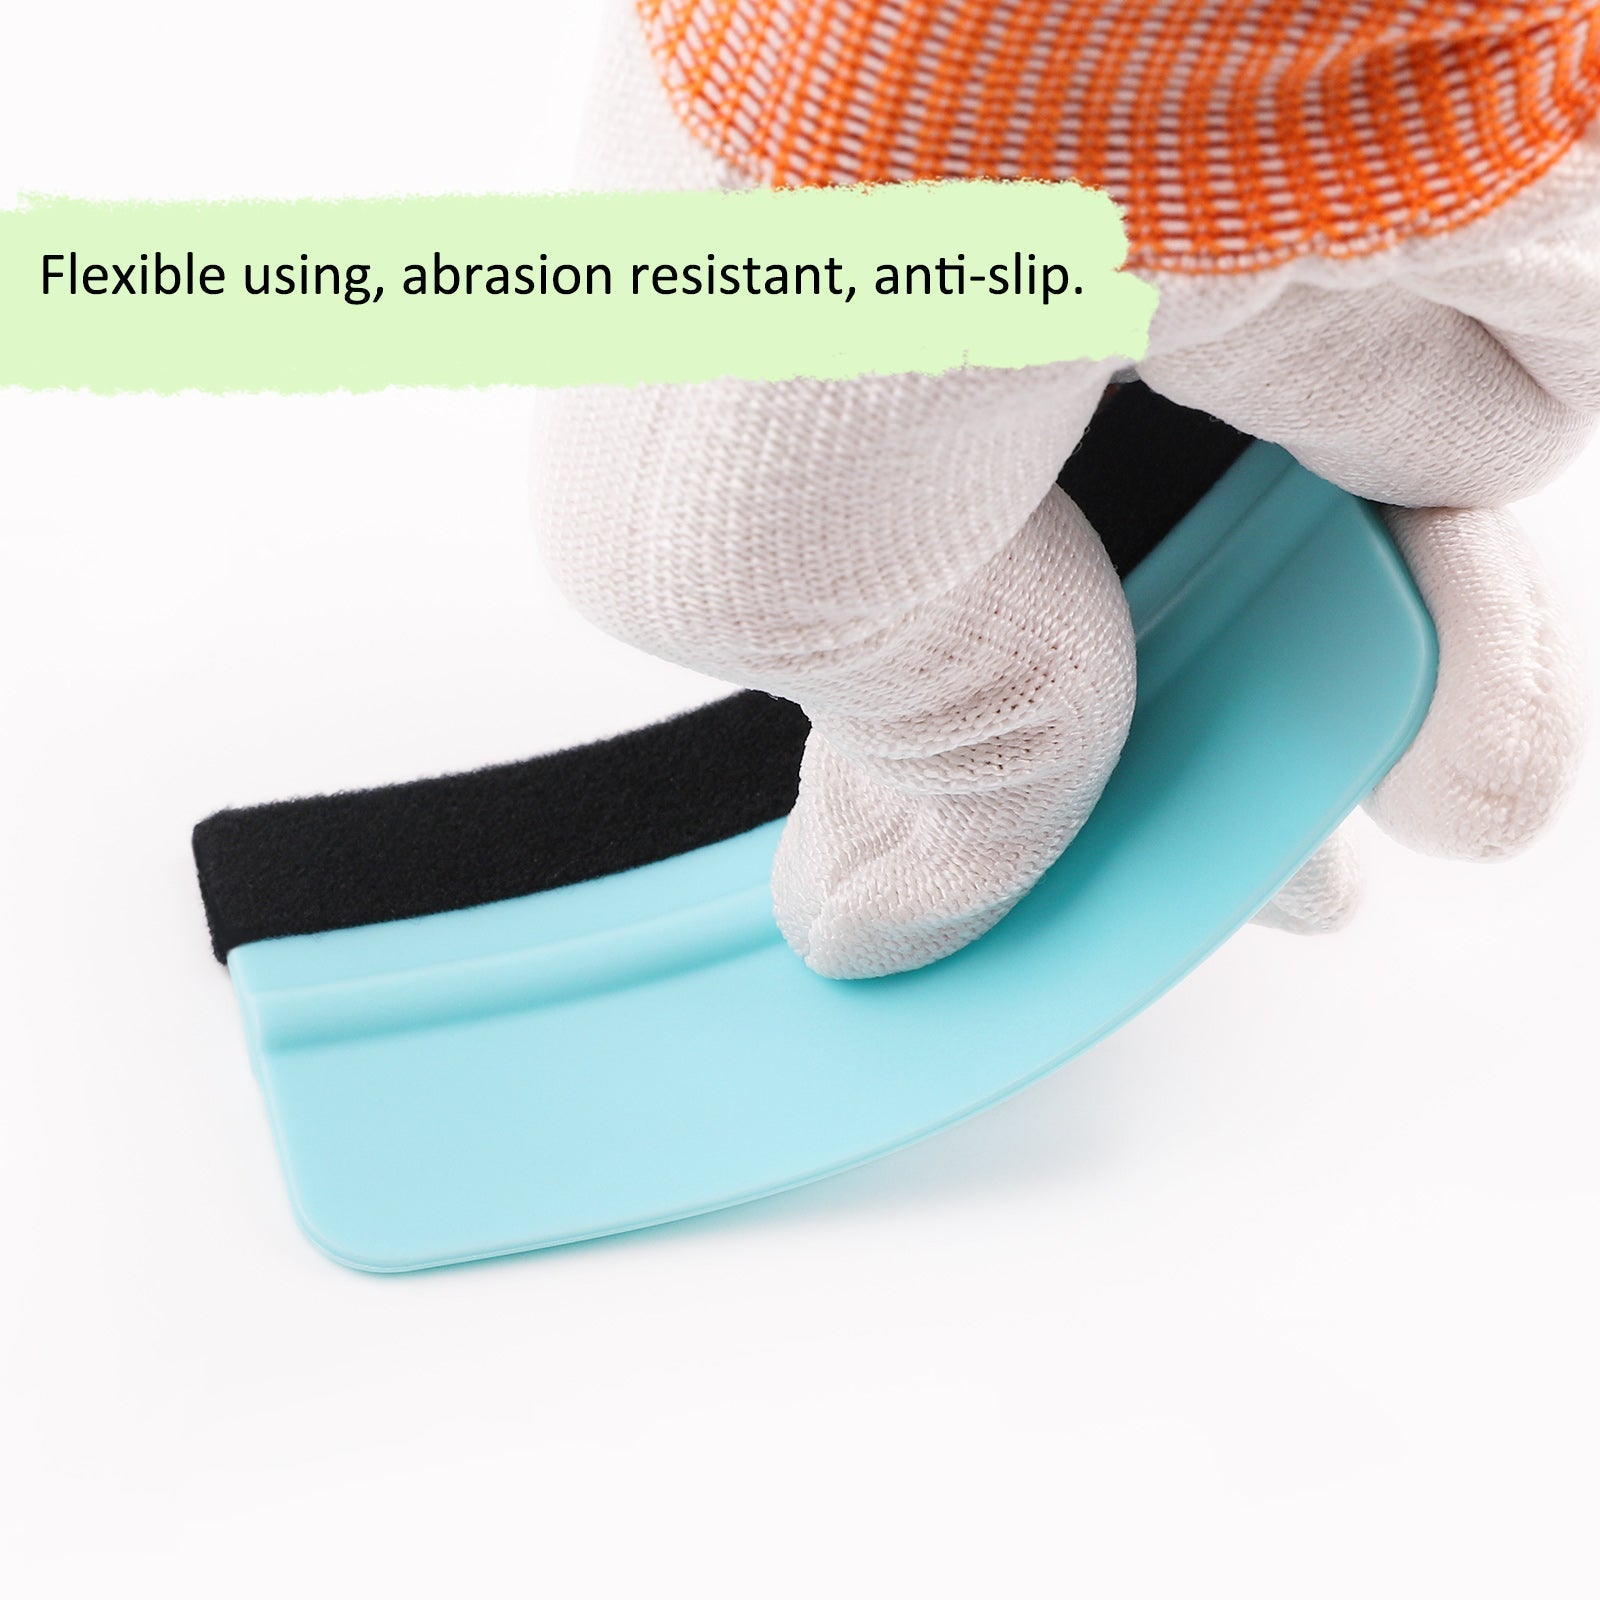 Flexible Mini Squeegee 2 PCS in mint color flexible and durable